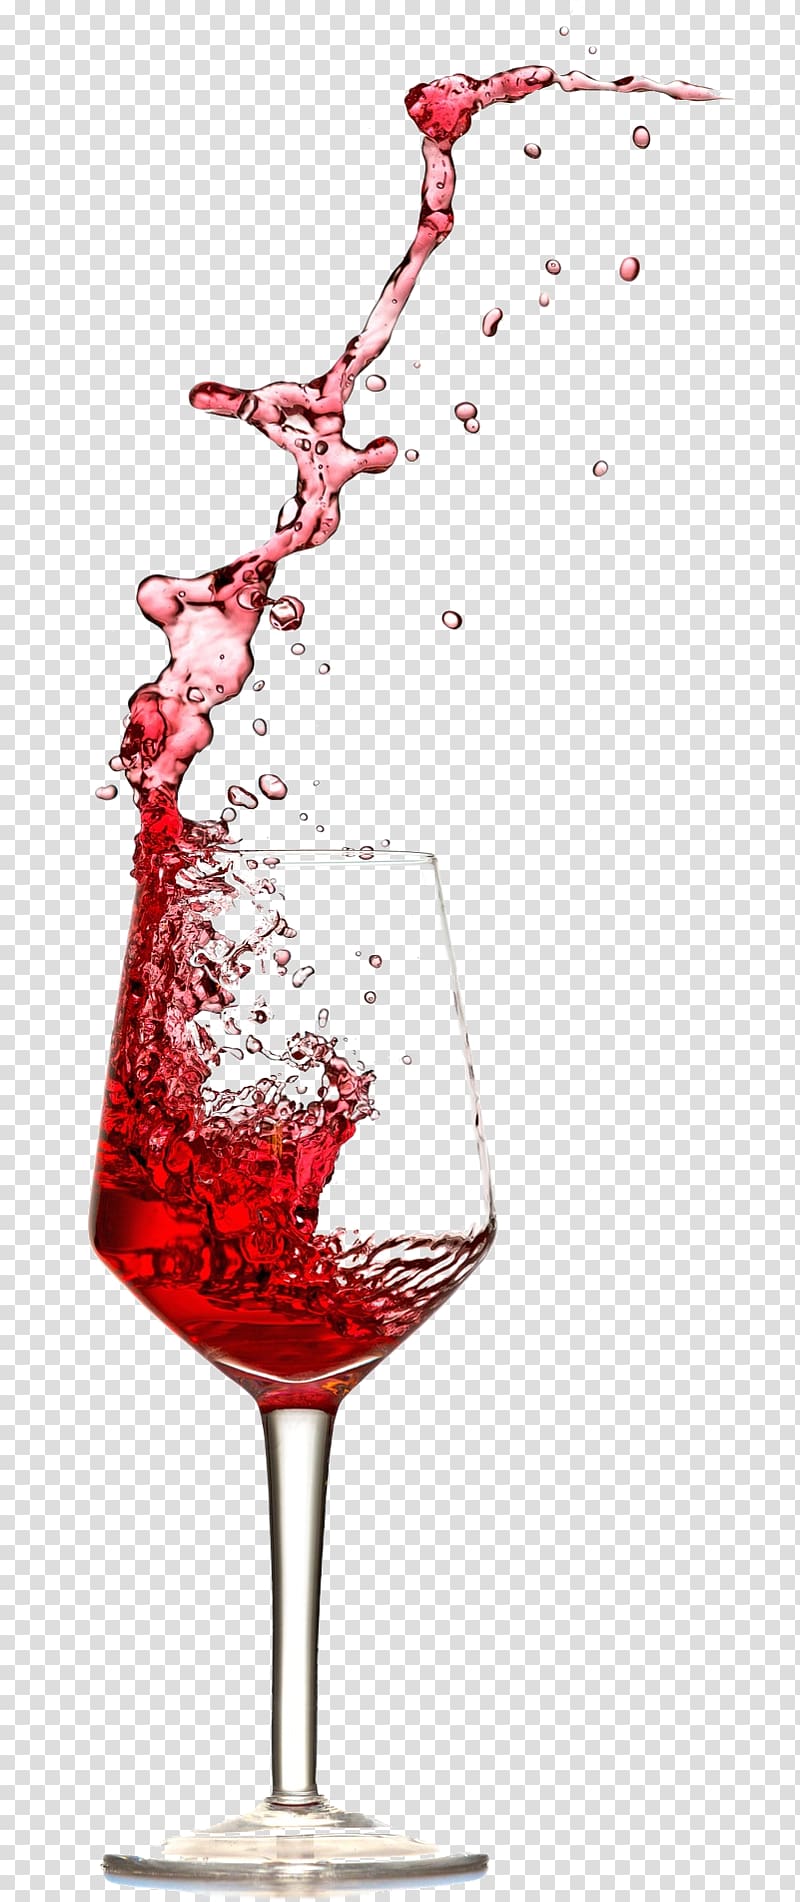 Wine glass Champagne Distilled beverage Red Wine, wine transparent background PNG clipart